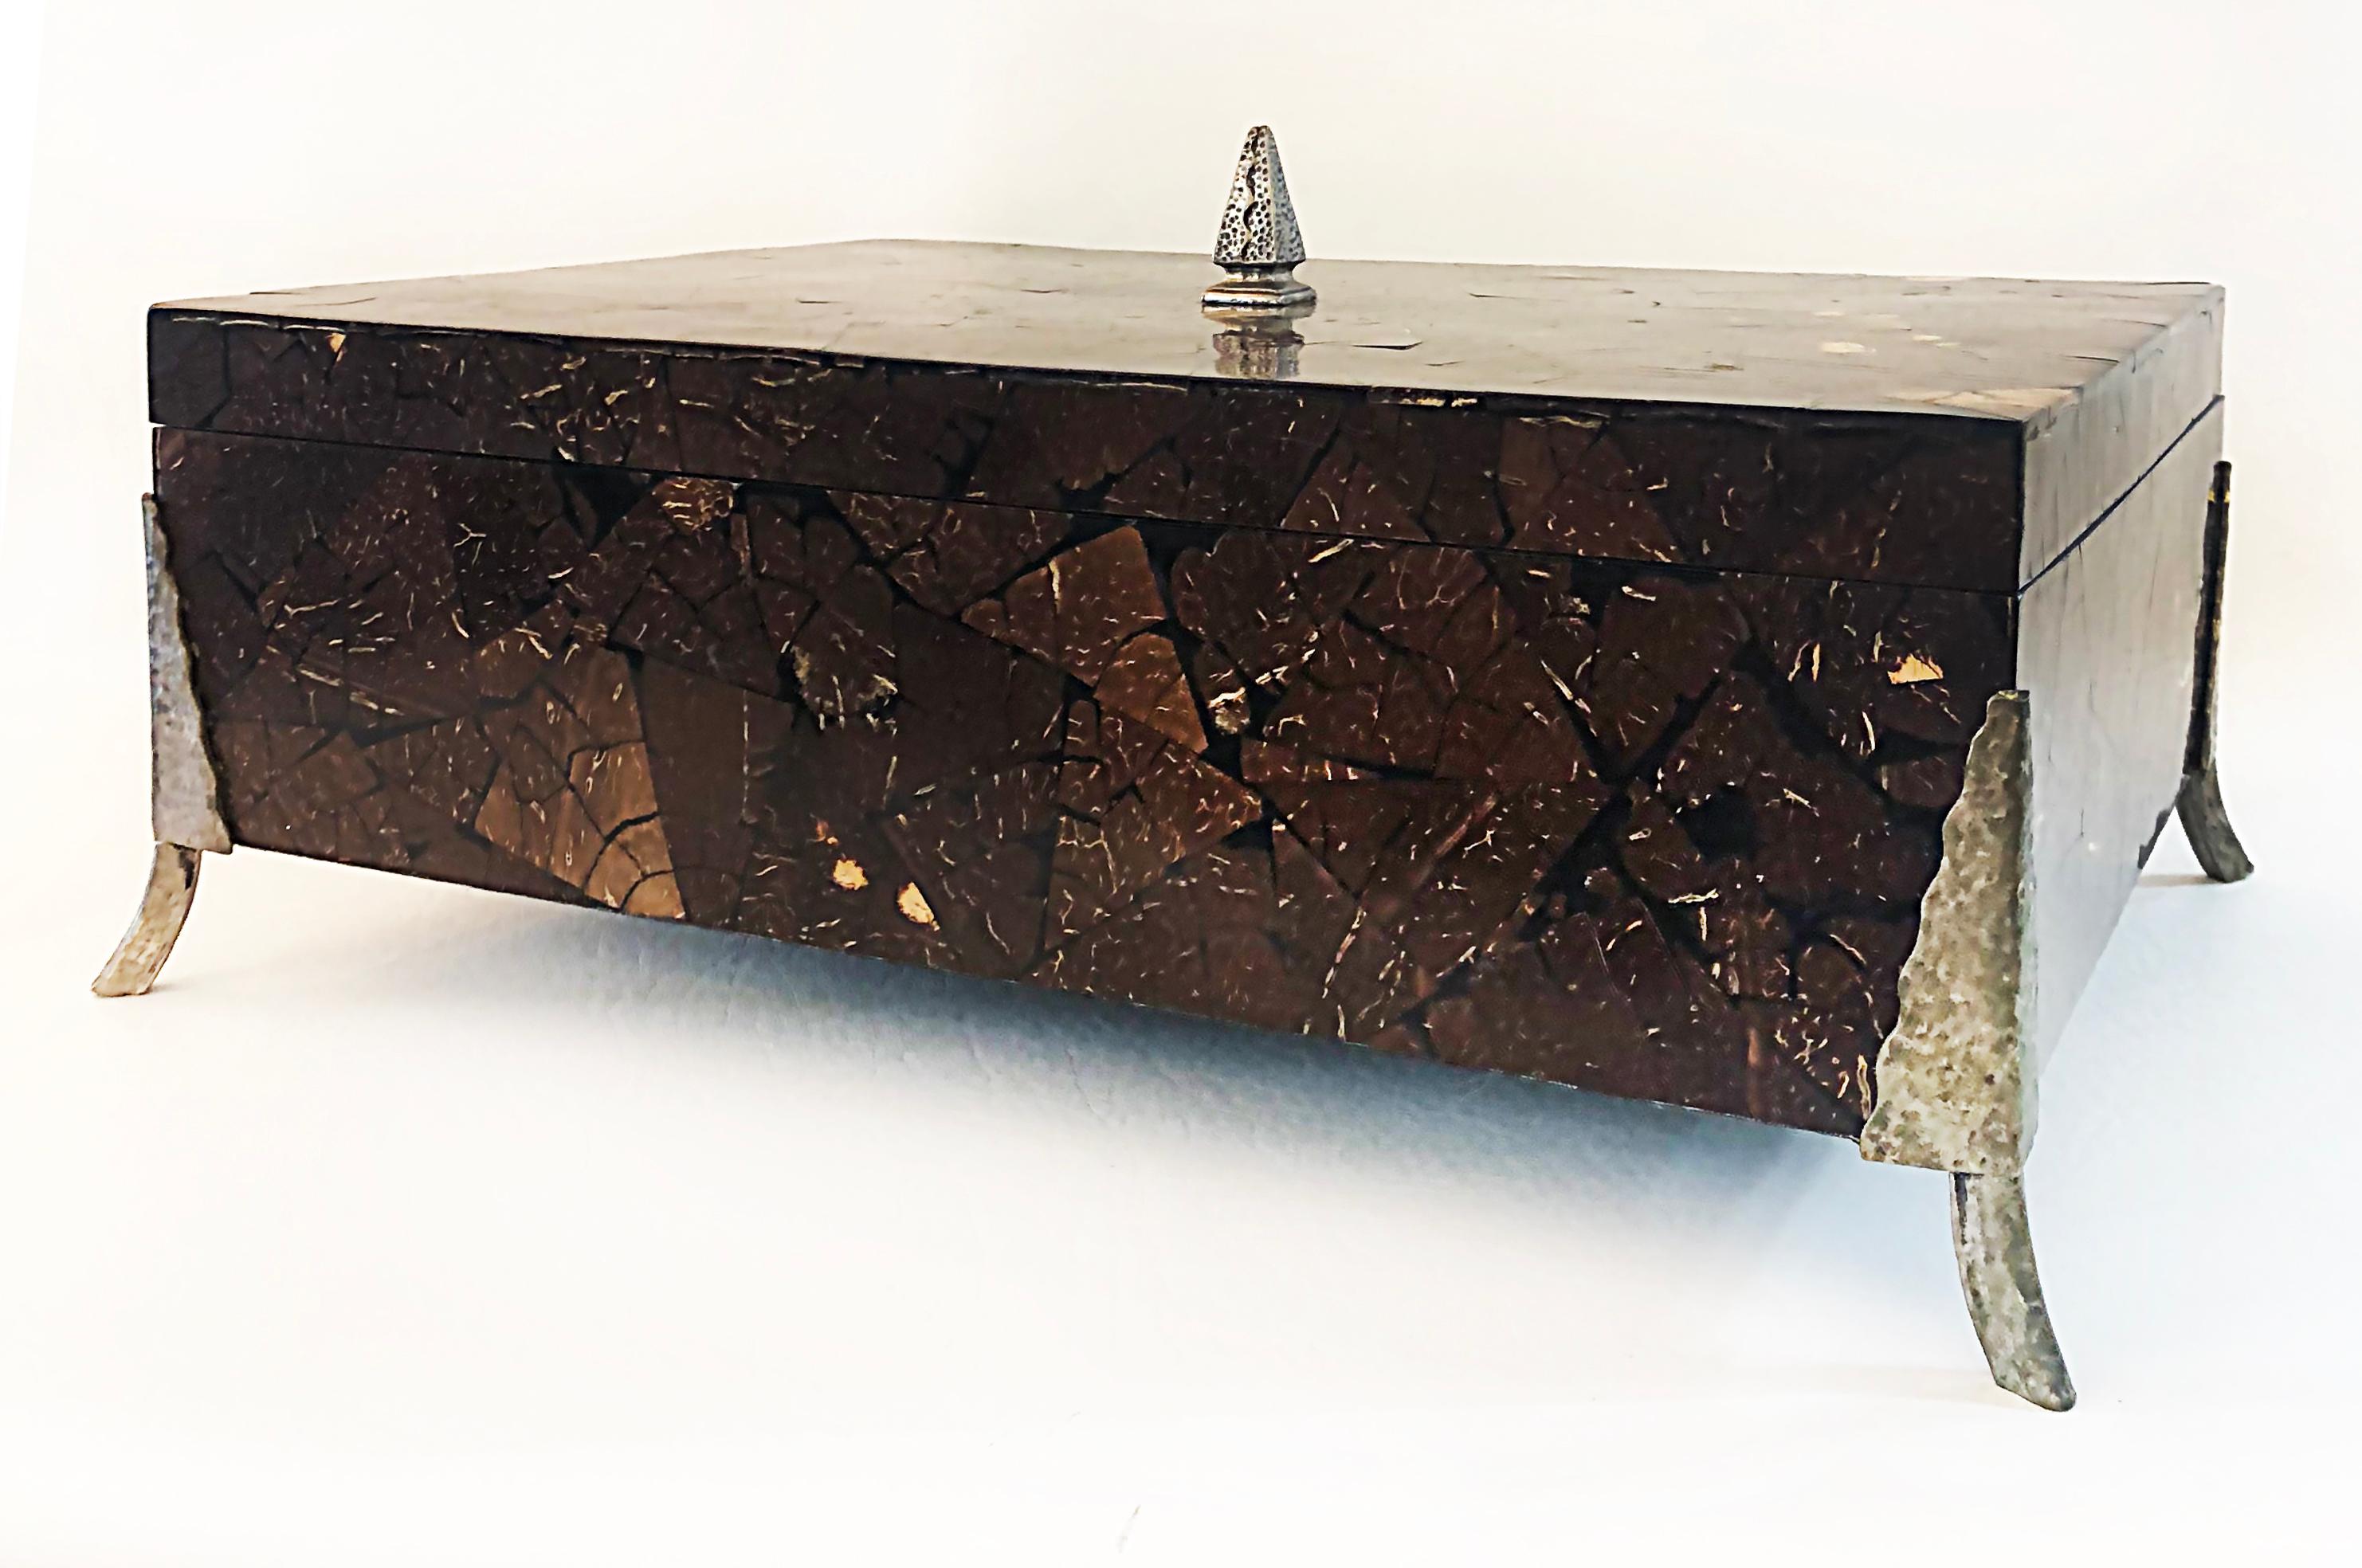 Oggetti Tessellated Coconut Shell Lidded Box with Bronze Mounts, 1990s

Offered for sale is an elegant lidded box by Oggetti that is clad in tessellated crushed and polished coconut. The box is supported by bronze mount legs and is marked as made in